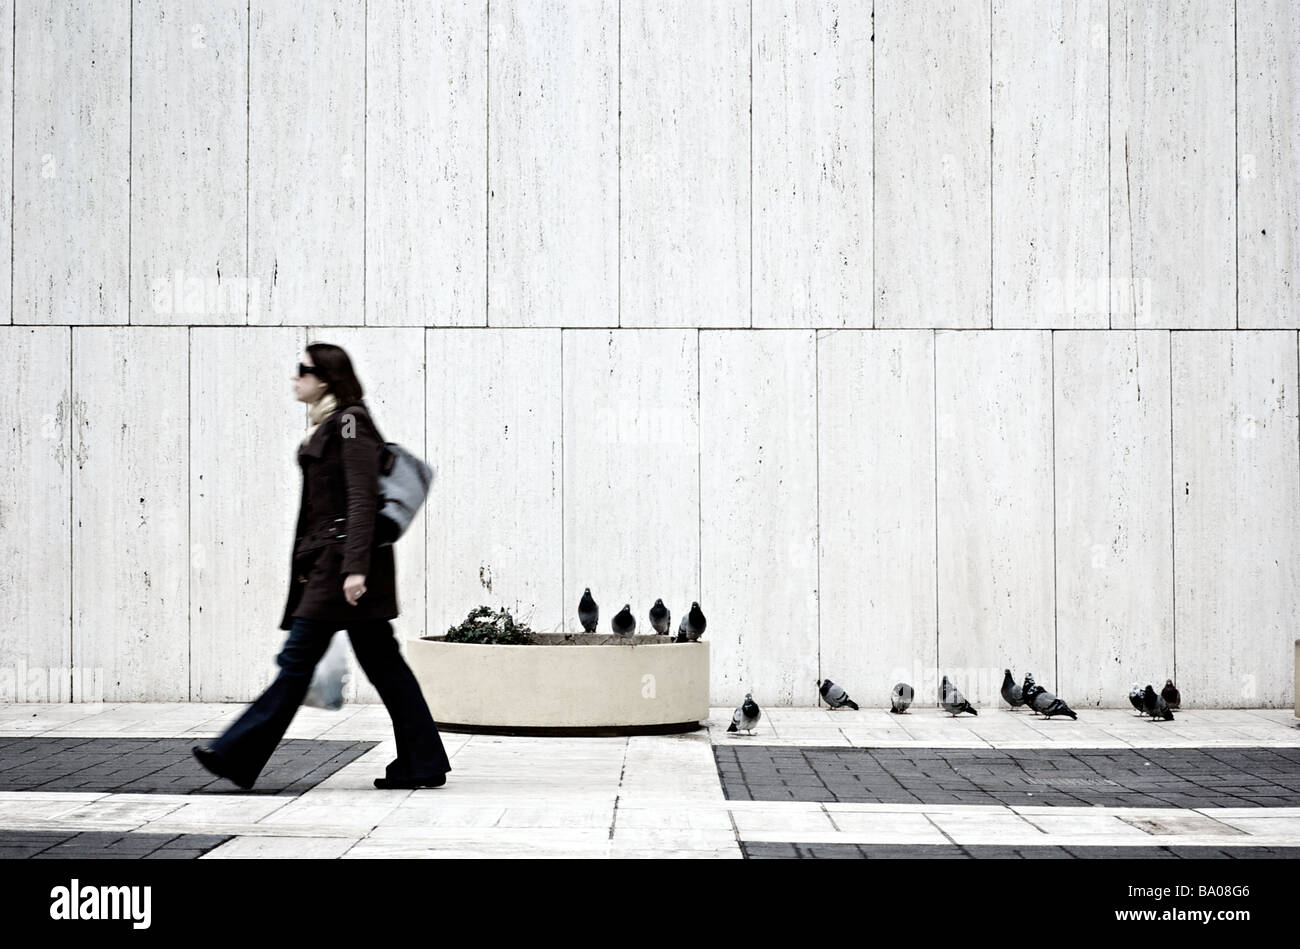 Woman Walking Past Perching Pigeons in Urban Plaza in New York City, USA (For Editorial Use Only) Stock Photo